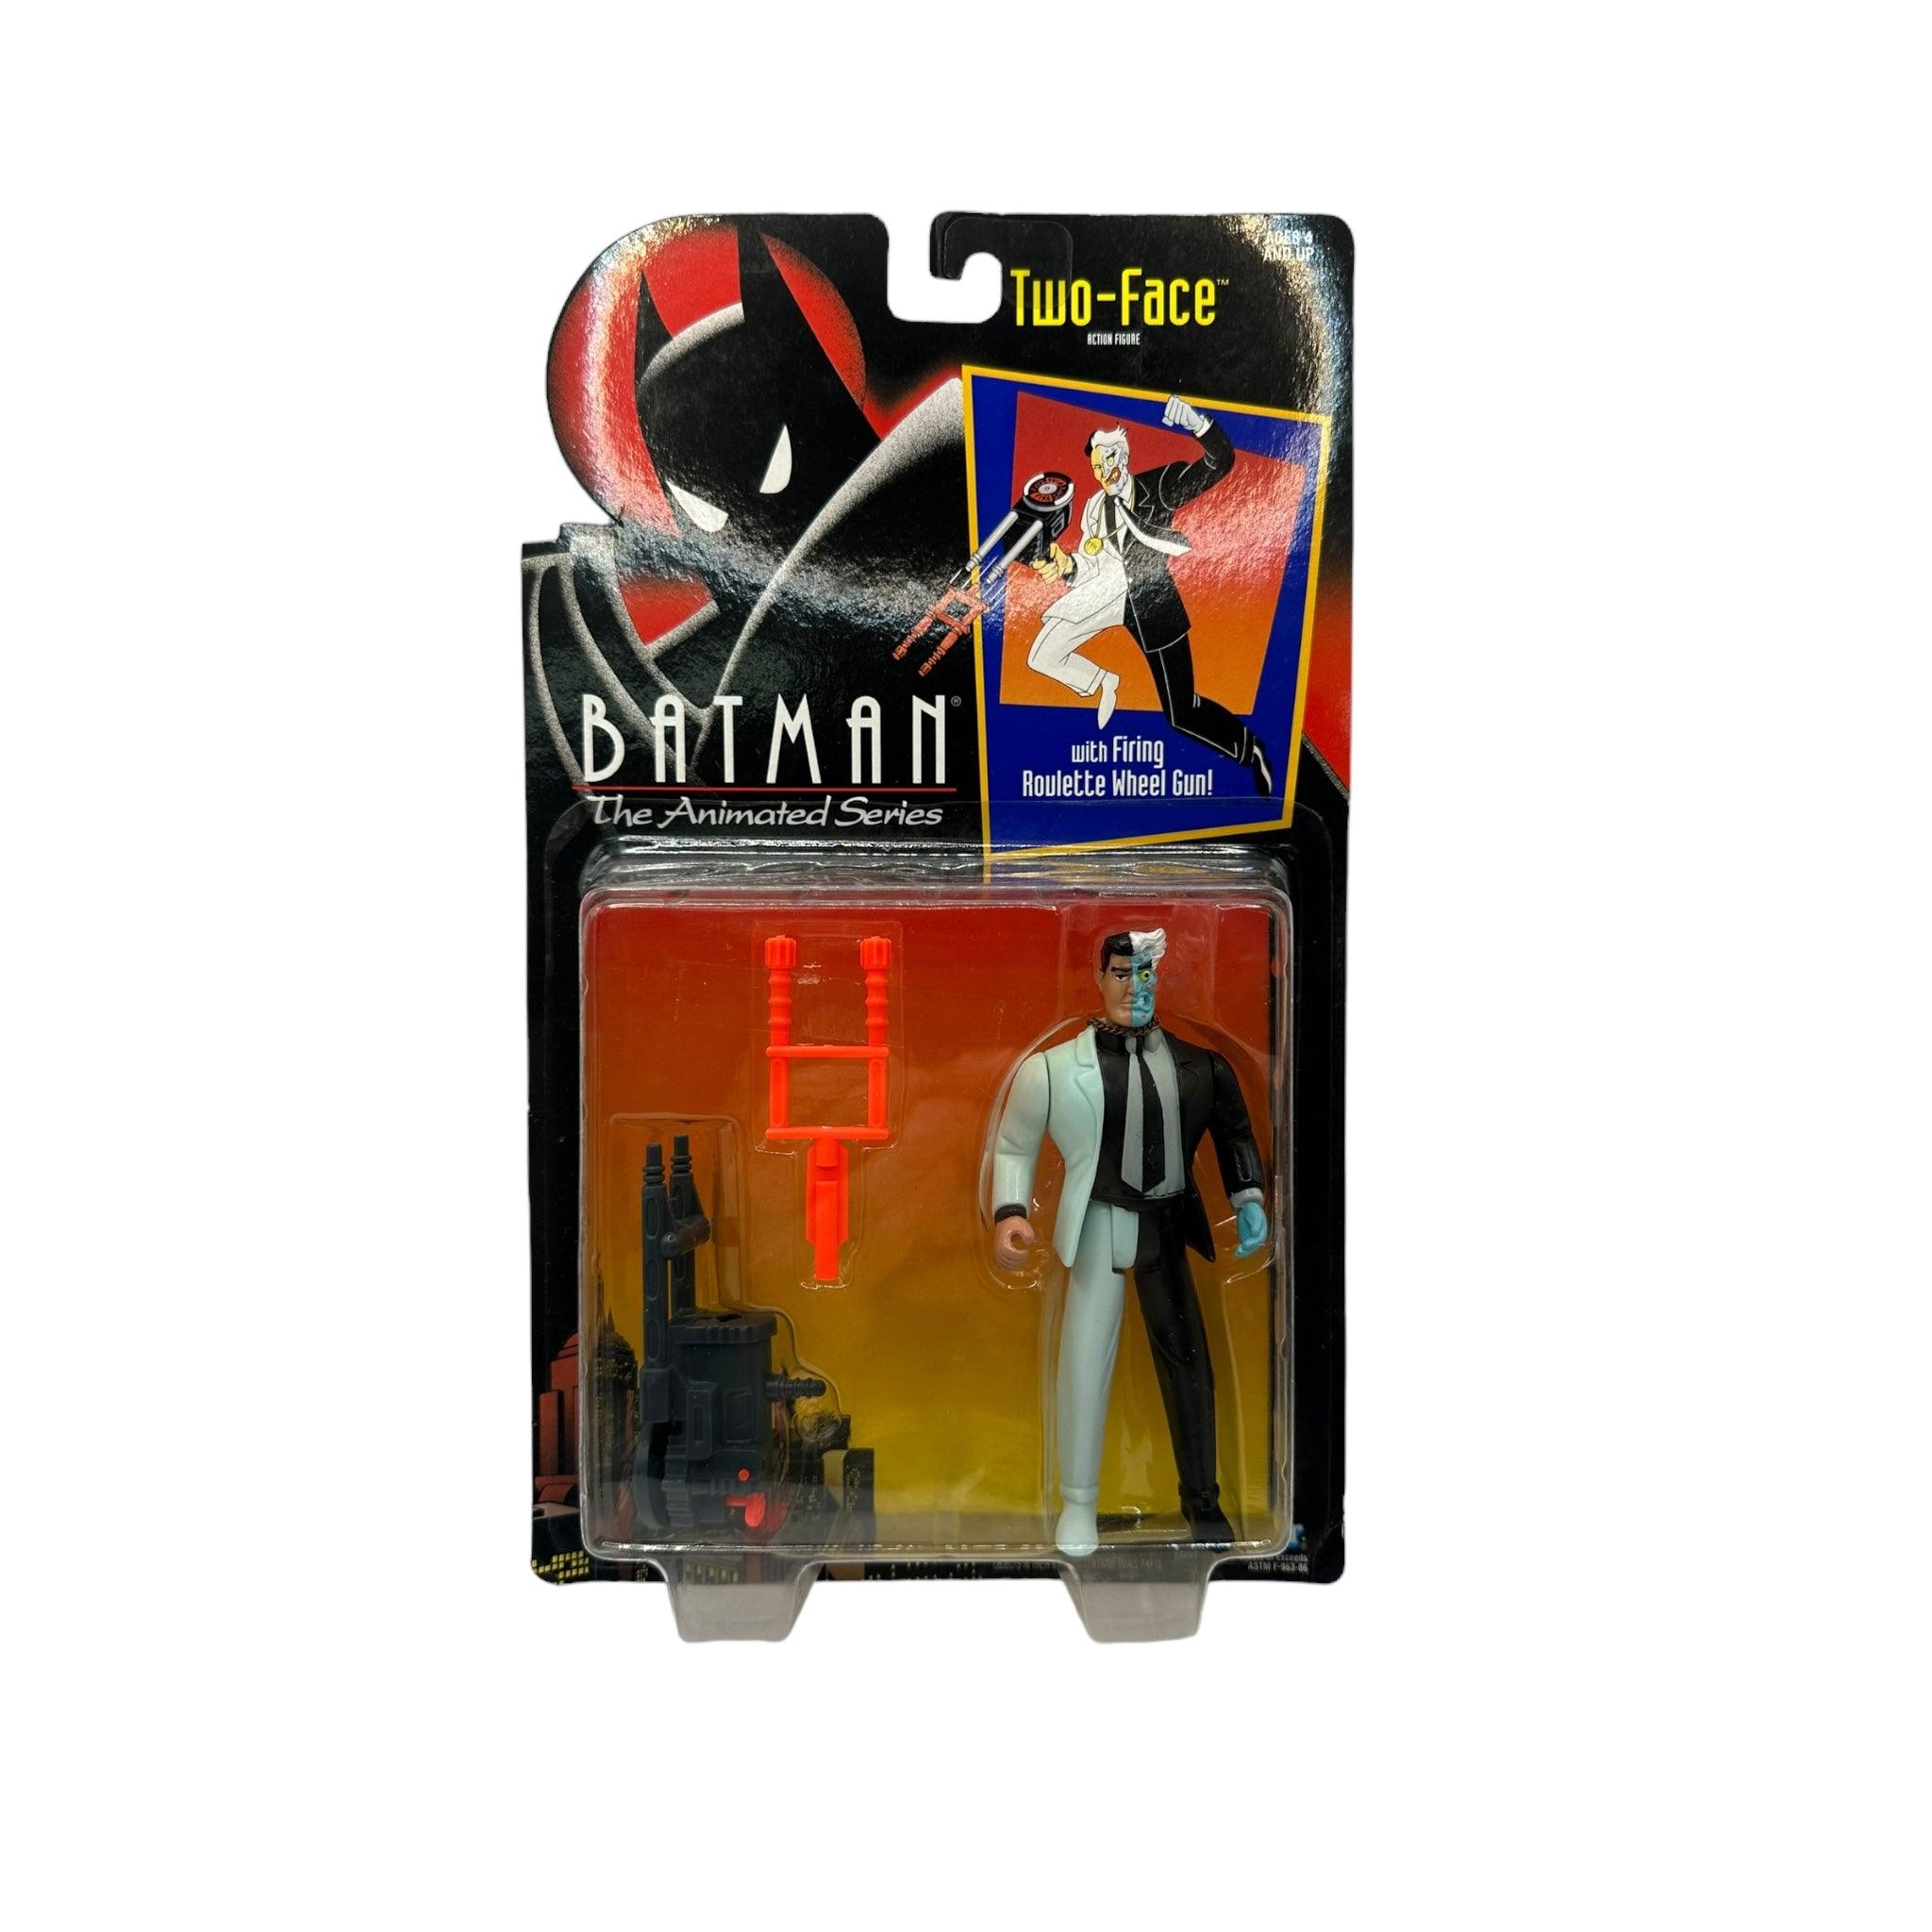 1992 KENNER BATMAN ANIMATED SERIES 1 TWO-FACE AF - Kings Comics